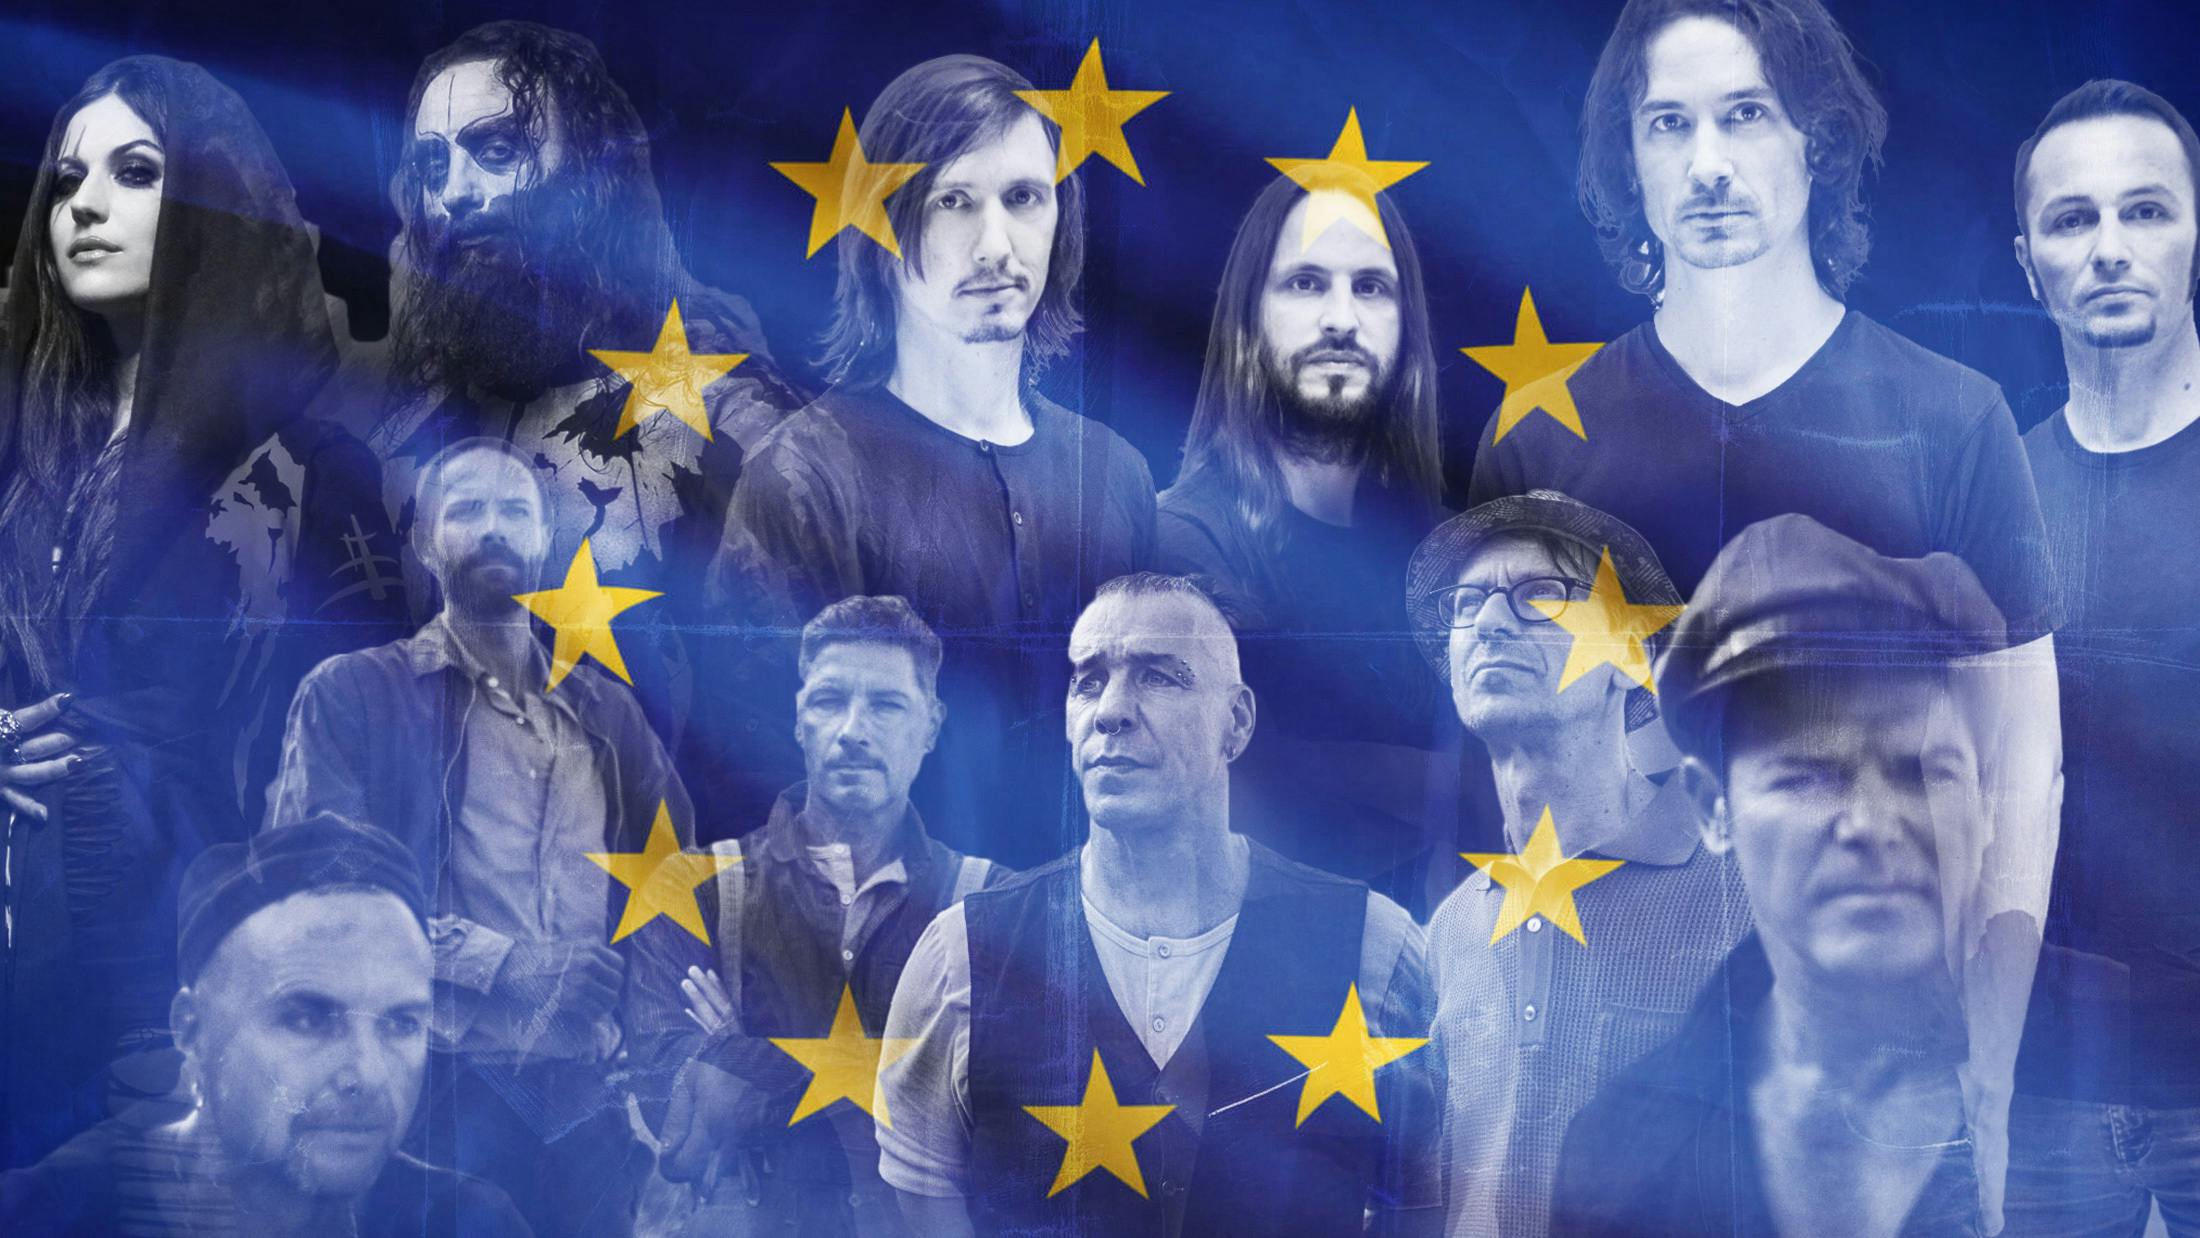 11 Of The Greatest Rock Bands From Europe